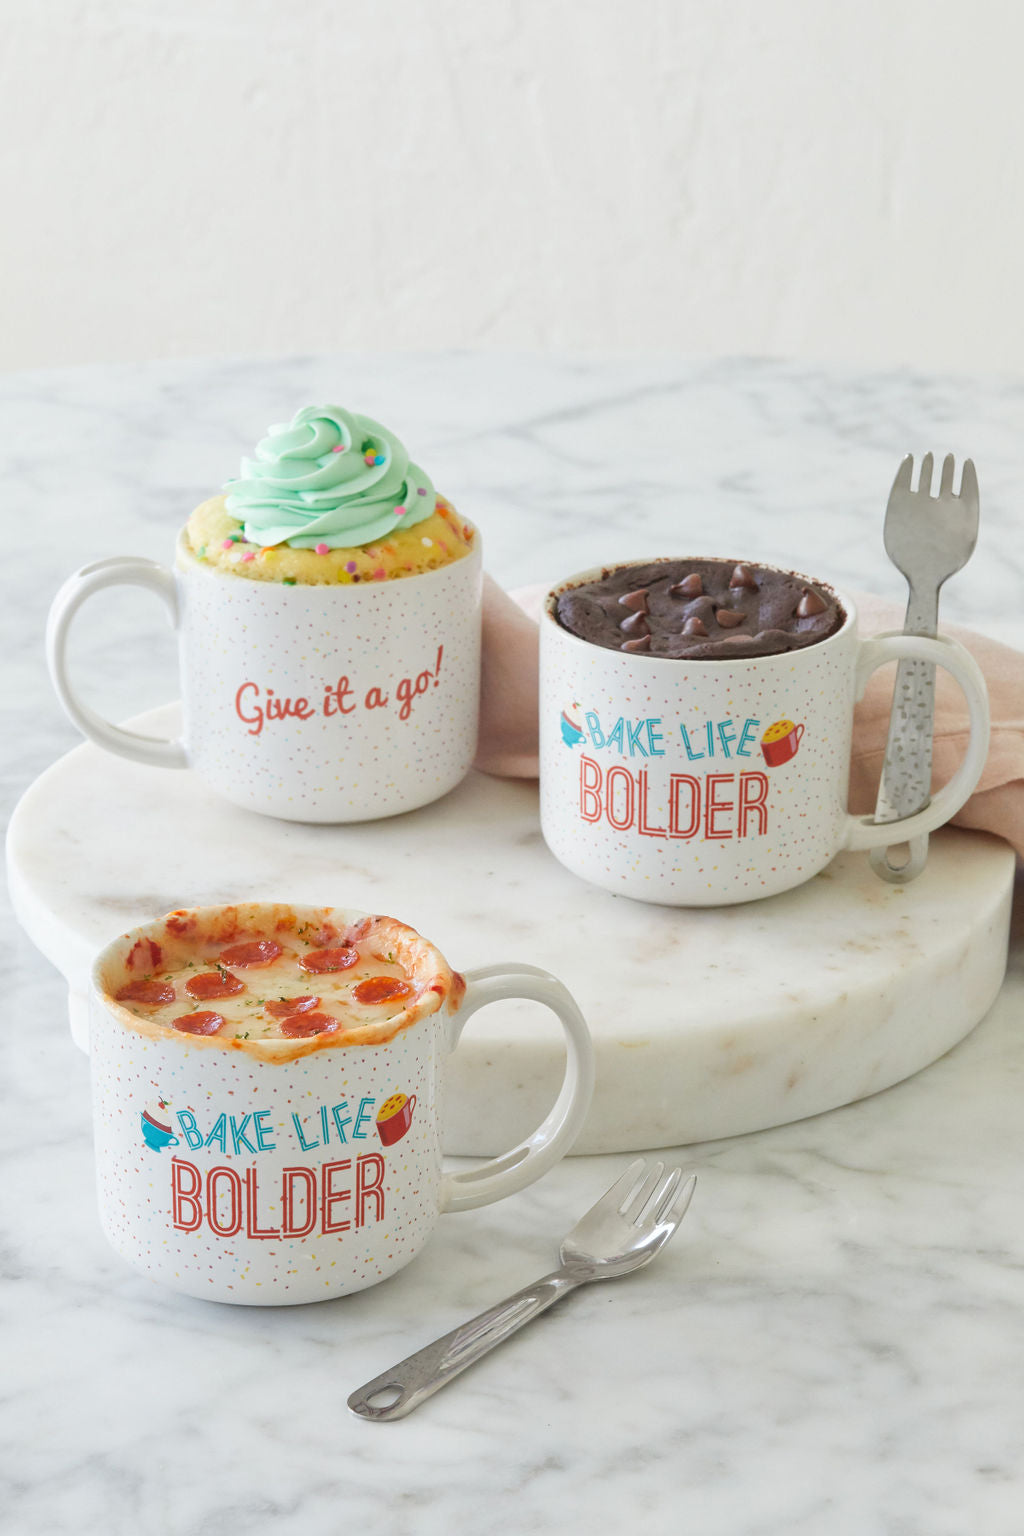 Gemma's Mug Meals Mugs: Perfect Mugs For All Your Microwave Baking